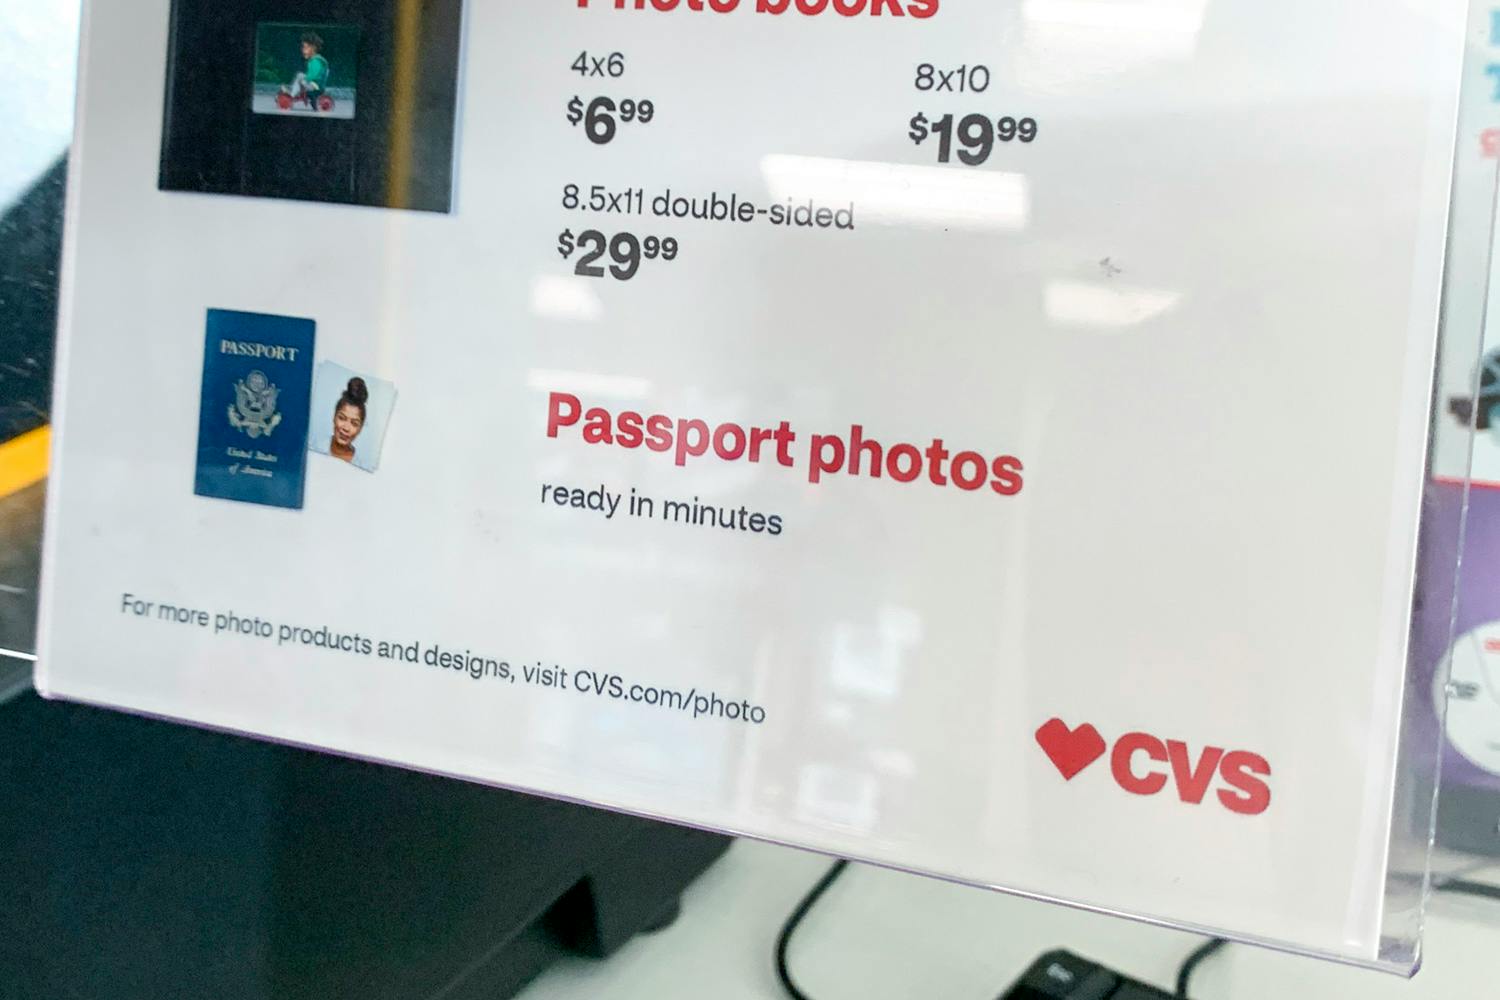 do you need an appointment for cvs passport photo